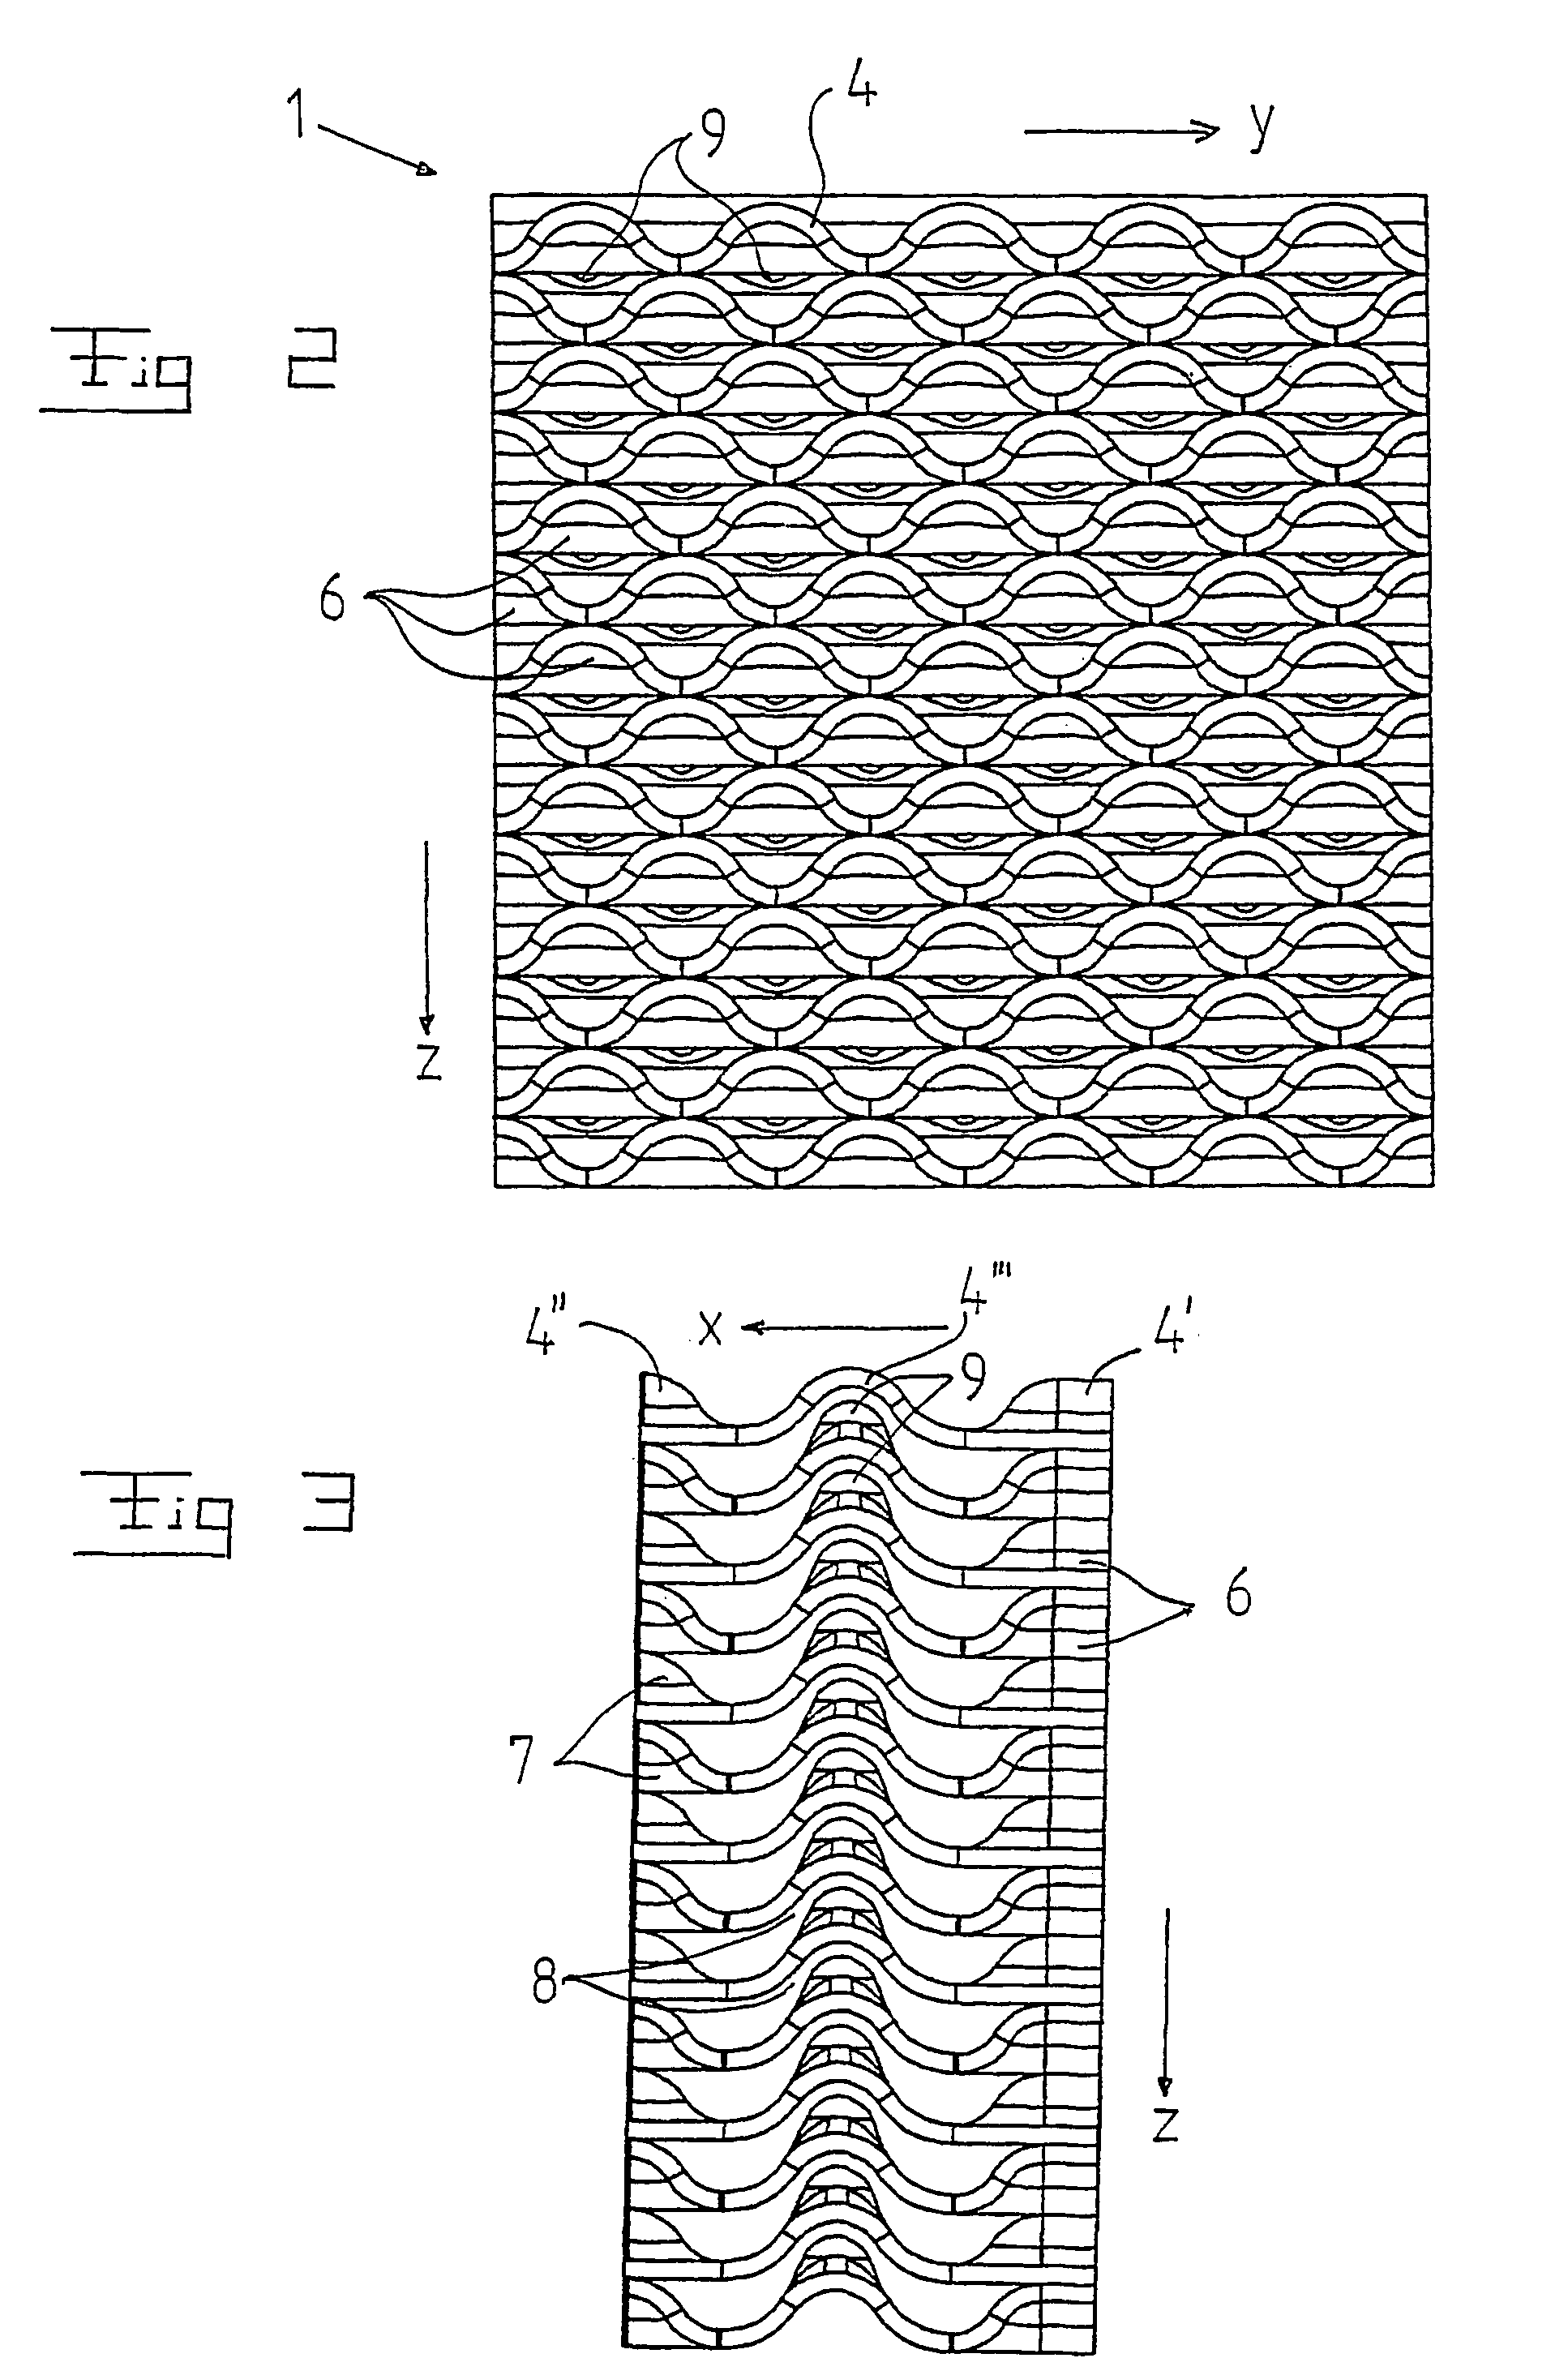 Filter for cooling water in a light water cooled nuclear reactor